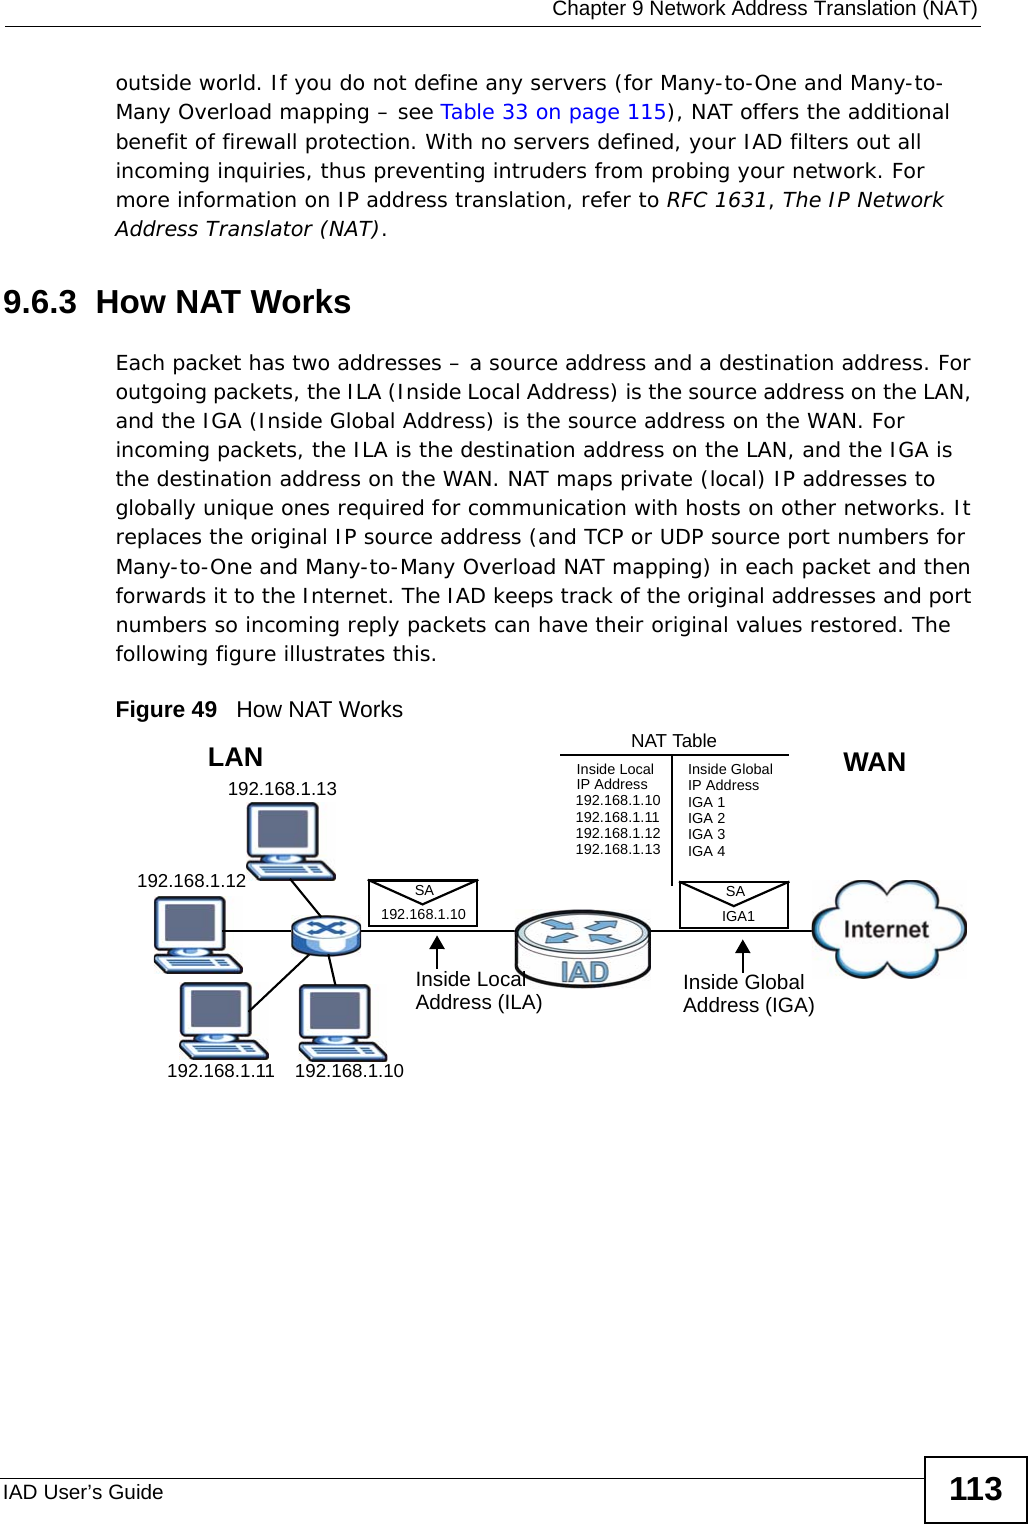  Chapter 9 Network Address Translation (NAT)IAD User’s Guide 113outside world. If you do not define any servers (for Many-to-One and Many-to-Many Overload mapping – see Table 33 on page 115), NAT offers the additional benefit of firewall protection. With no servers defined, your IAD filters out all incoming inquiries, thus preventing intruders from probing your network. For more information on IP address translation, refer to RFC 1631, The IP Network Address Translator (NAT).9.6.3  How NAT WorksEach packet has two addresses – a source address and a destination address. For outgoing packets, the ILA (Inside Local Address) is the source address on the LAN, and the IGA (Inside Global Address) is the source address on the WAN. For incoming packets, the ILA is the destination address on the LAN, and the IGA is the destination address on the WAN. NAT maps private (local) IP addresses to globally unique ones required for communication with hosts on other networks. It replaces the original IP source address (and TCP or UDP source port numbers for Many-to-One and Many-to-Many Overload NAT mapping) in each packet and then forwards it to the Internet. The IAD keeps track of the original addresses and port numbers so incoming reply packets can have their original values restored. The following figure illustrates this.Figure 49   How NAT Works192.168.1.13192.168.1.10192.168.1.11192.168.1.12 SA192.168.1.10SAIGA1Inside LocalIP Address192.168.1.10192.168.1.11192.168.1.12192.168.1.13Inside Global IP AddressIGA 1IGA 2IGA 3IGA 4NAT Table WANLANInside LocalAddress (ILA) Inside GlobalAddress (IGA)